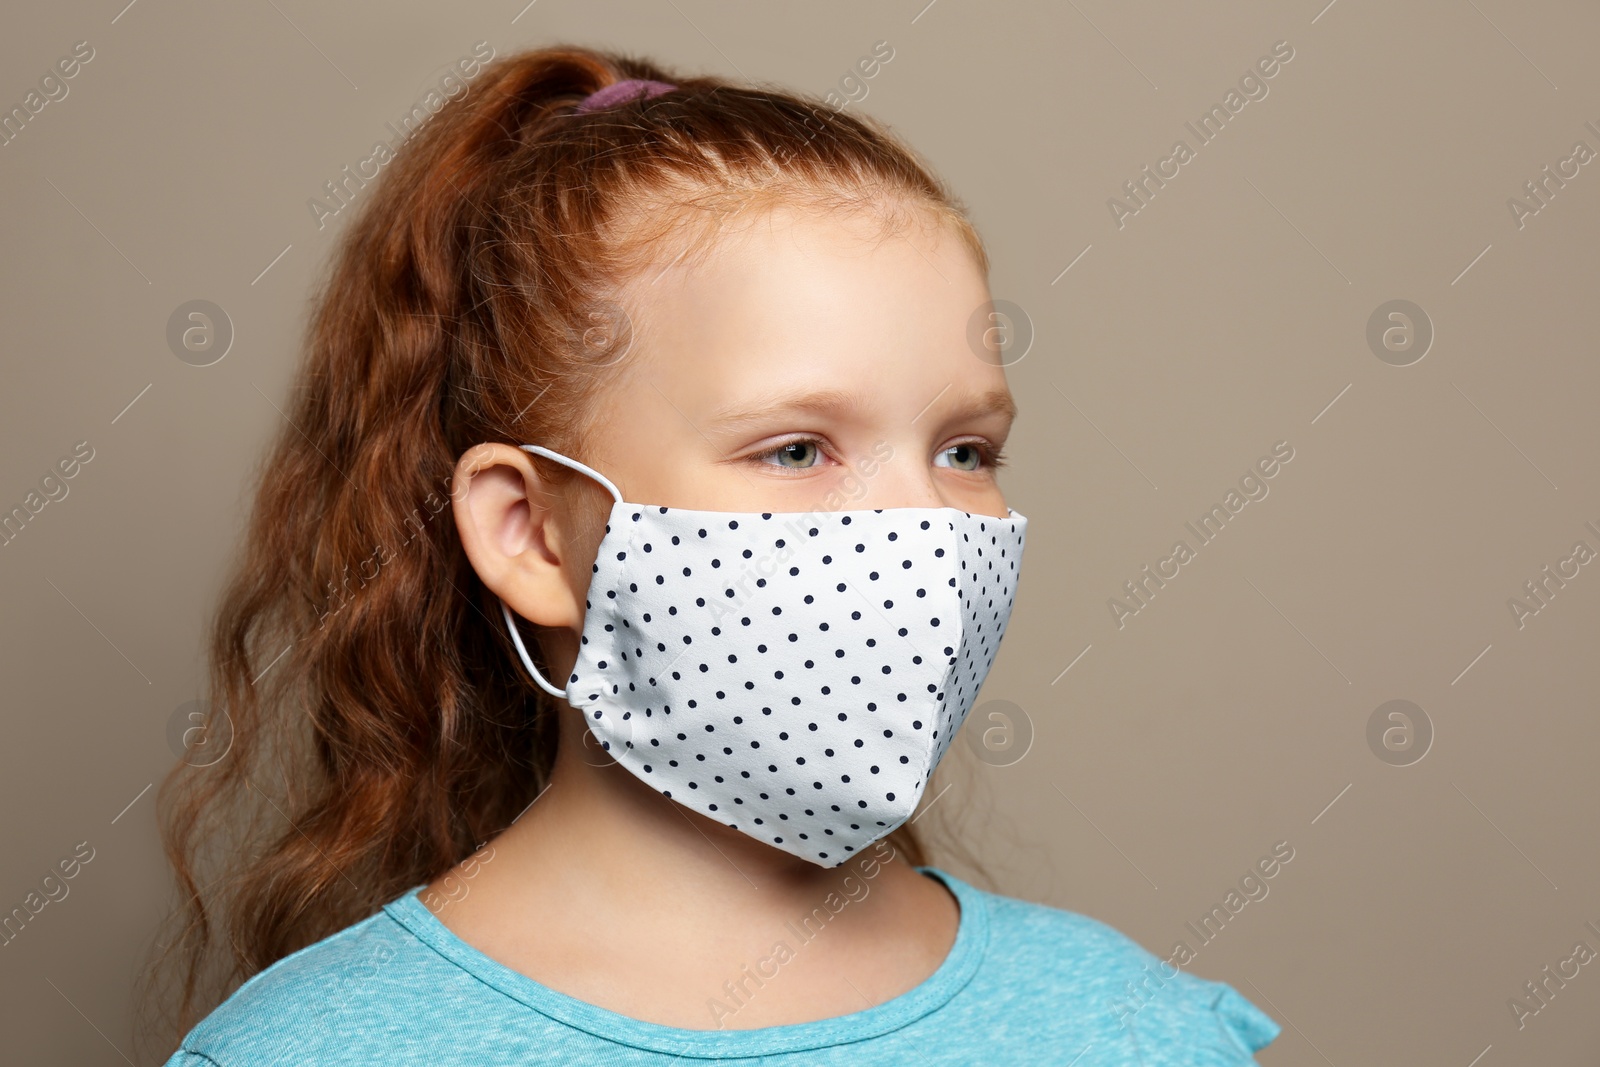 Photo of Preteen girl in protective face mask on brown background